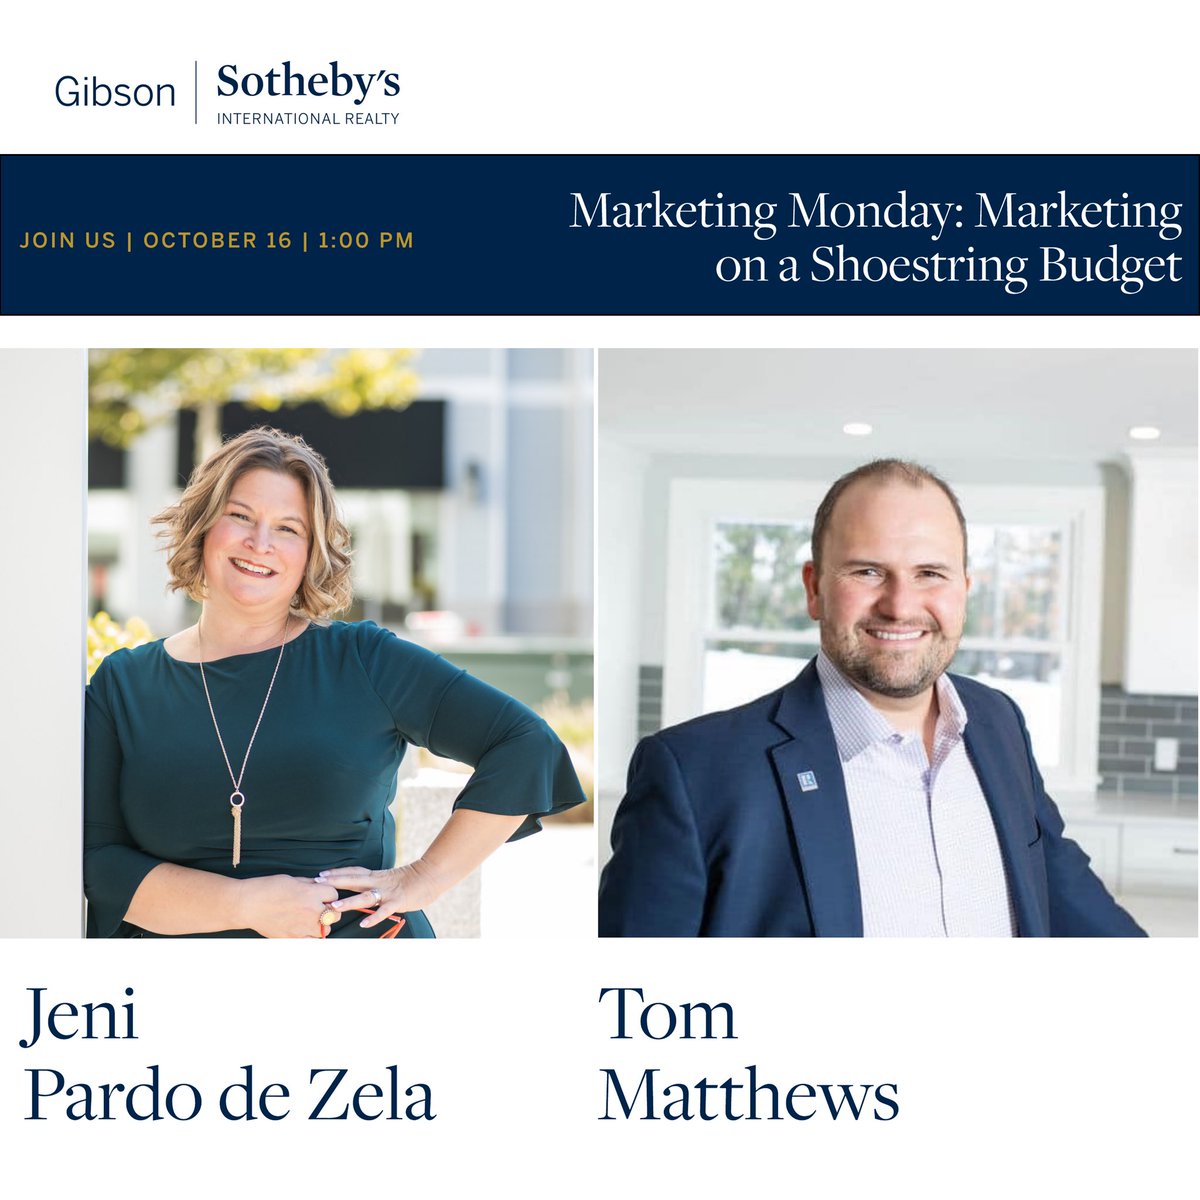 I am honored to be joining Jeni the VP of Marketing at GSIR on Monday October 18th at 1pm to share how to Leverage our Marketitng team to drive referrals and leads on a shoestring budget! #giversgain #gsir #expertisematters #marketing #realestate #tomjoanneteam